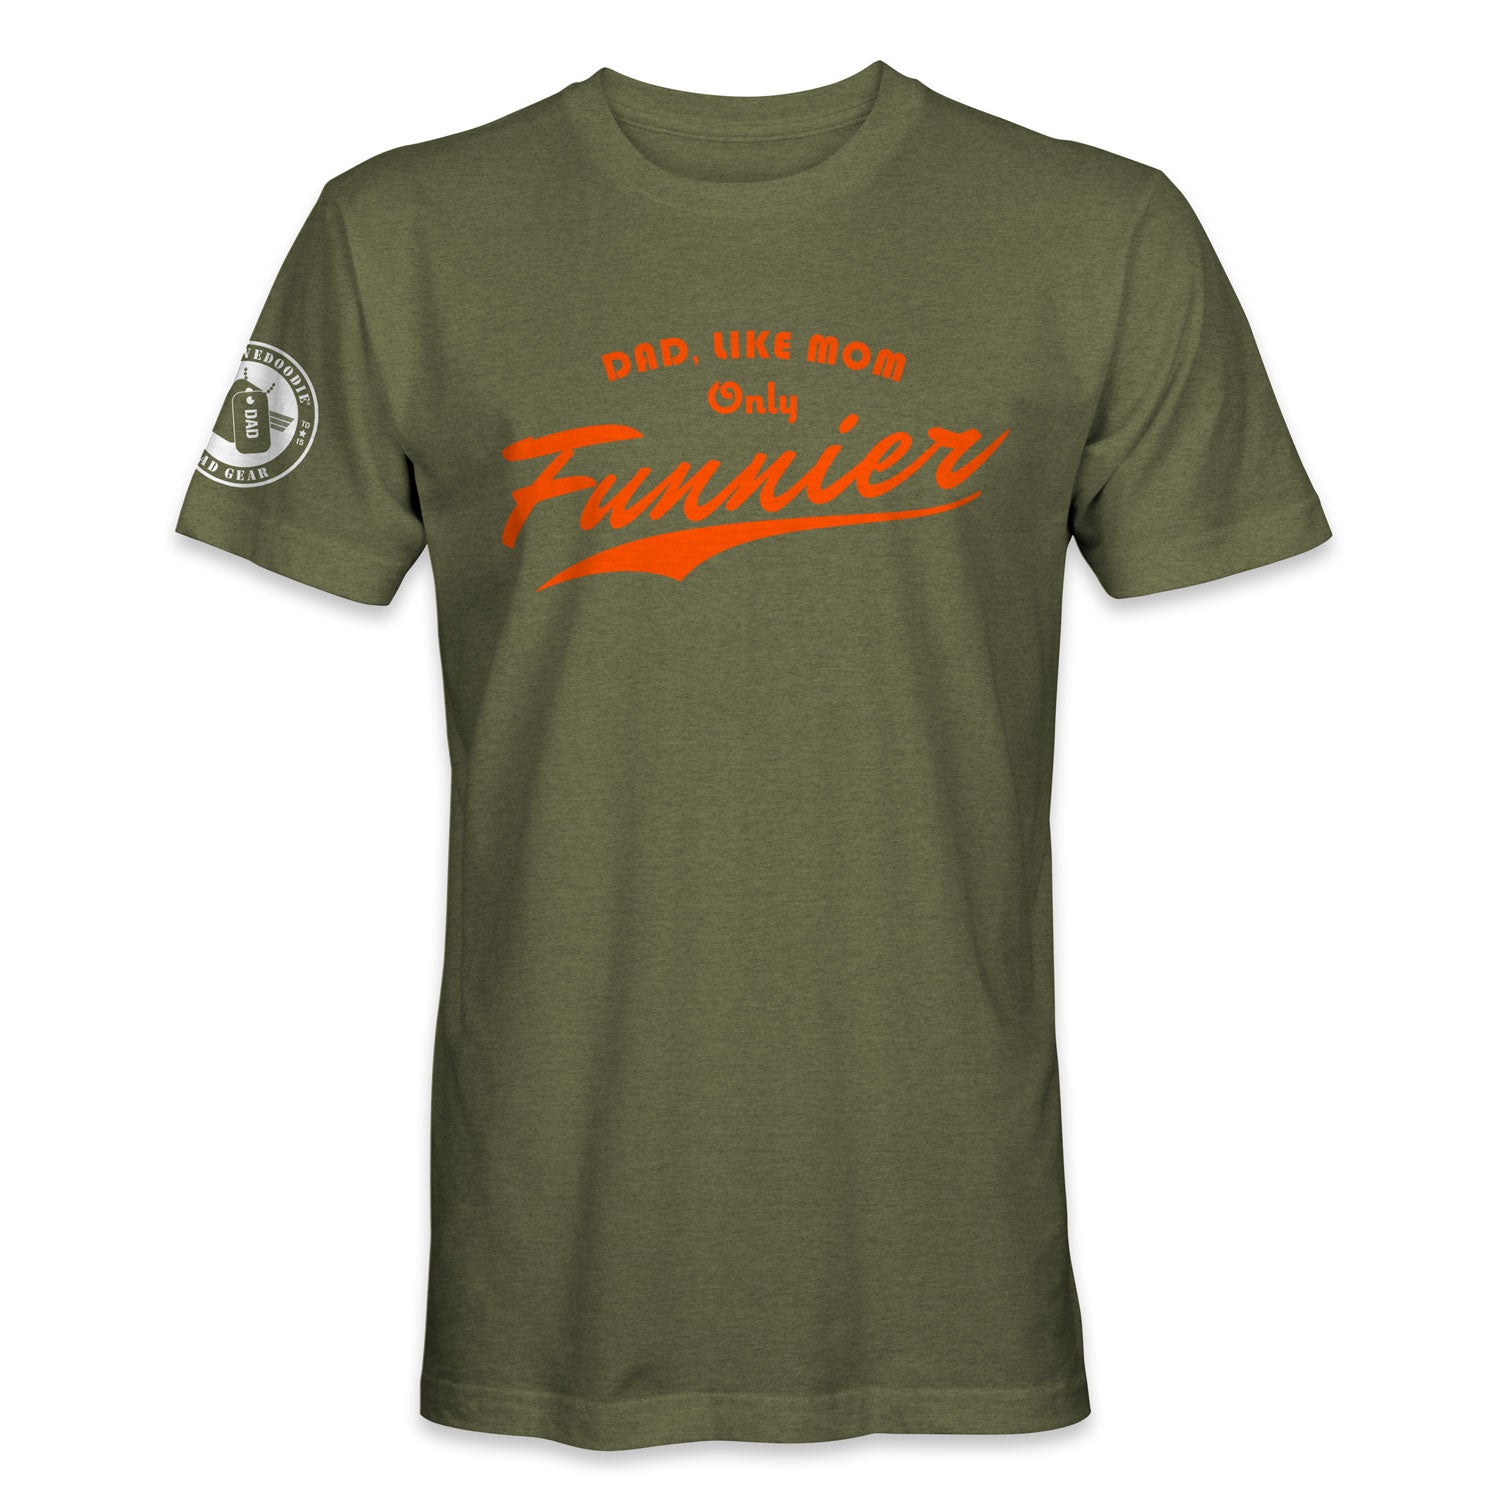 Dad Like Mom, Only Funnier T-Shirt for Dad in Green